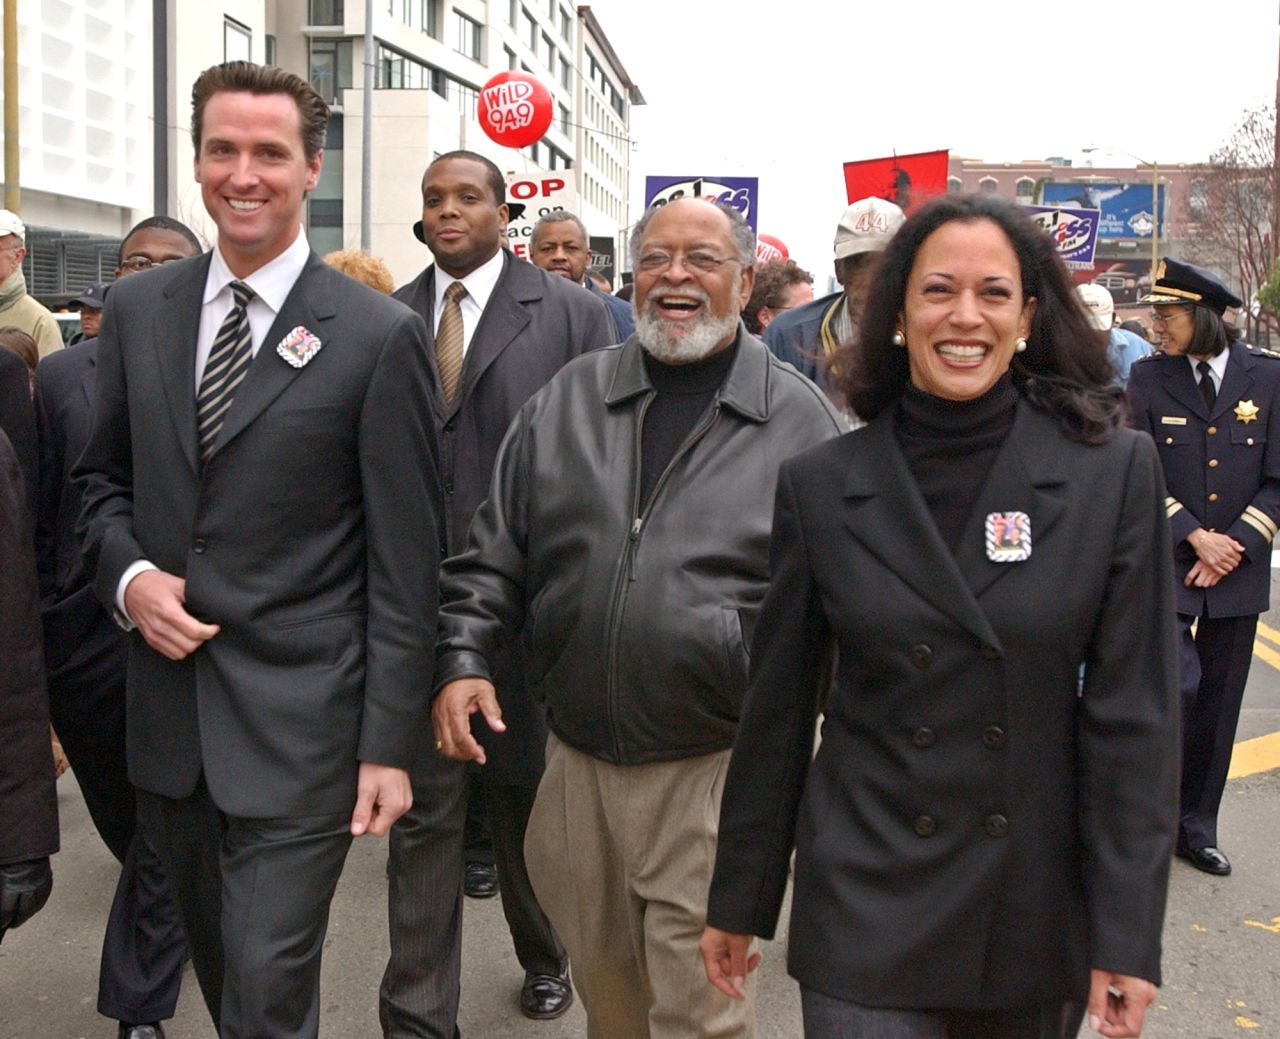 Harris is joined by San Francisco Mayor Gavin Newsom, left, and the Rev. Cecil  Williams, center, for a San Francisco march celebrating Martin Luther King Jr. in January 2004. Harris was the city's district attorney from 2004 to 2011.